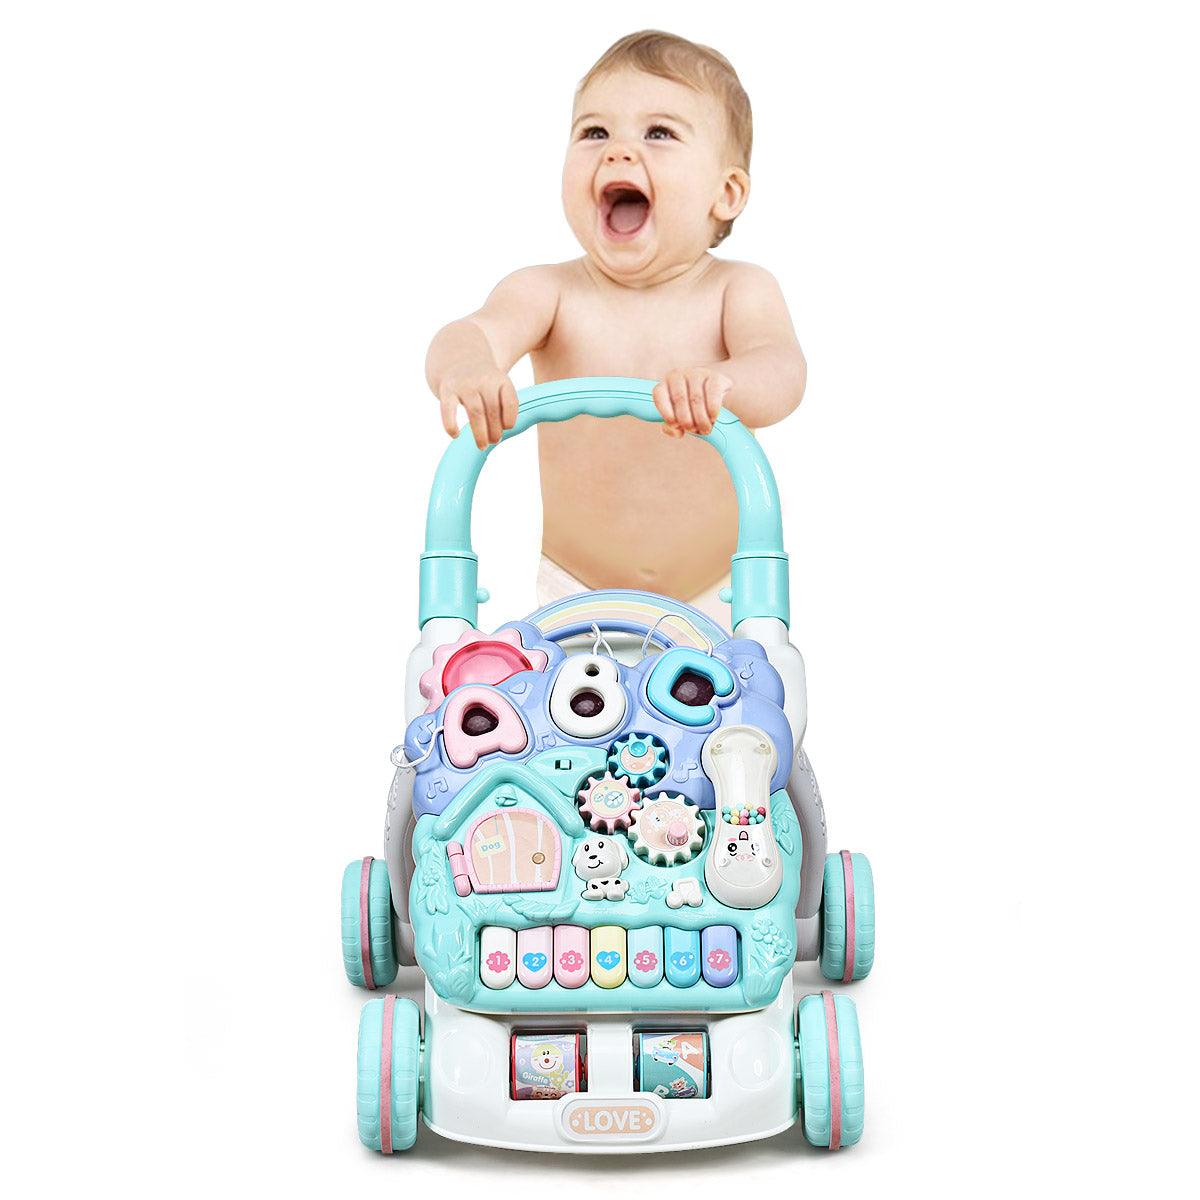 Happy Baby Sit-to-Stand Learning Walker Toddler Activity Center - Music w/ Lights (1U01)(X9)